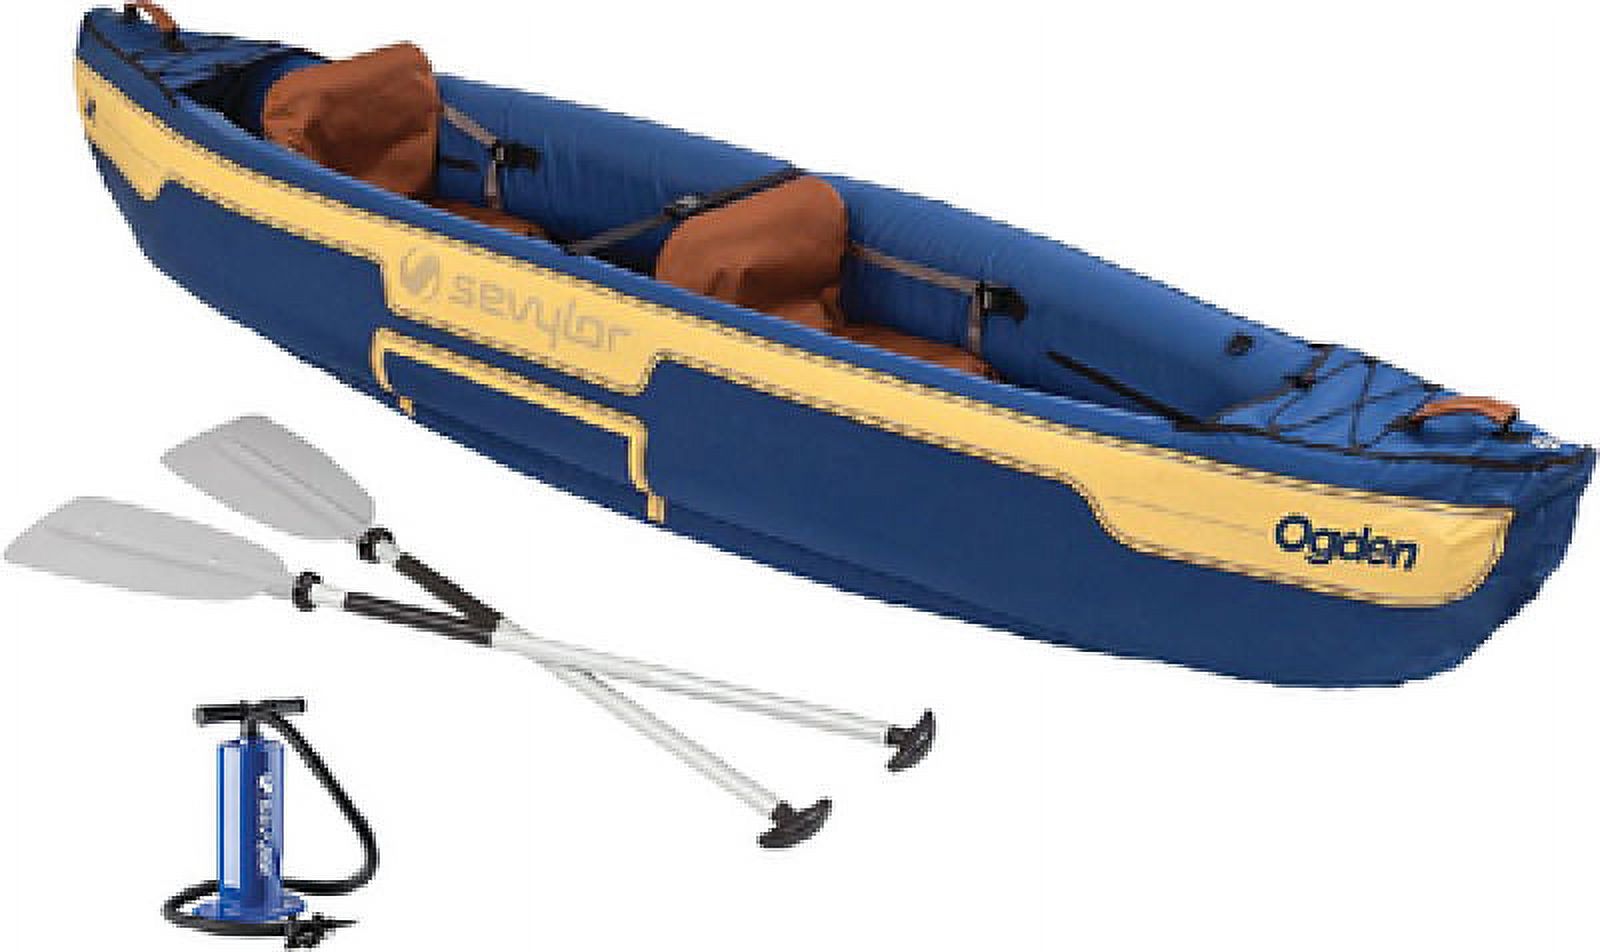 Coleman Ogden 2-Person Canoe Combo - image 1 of 3